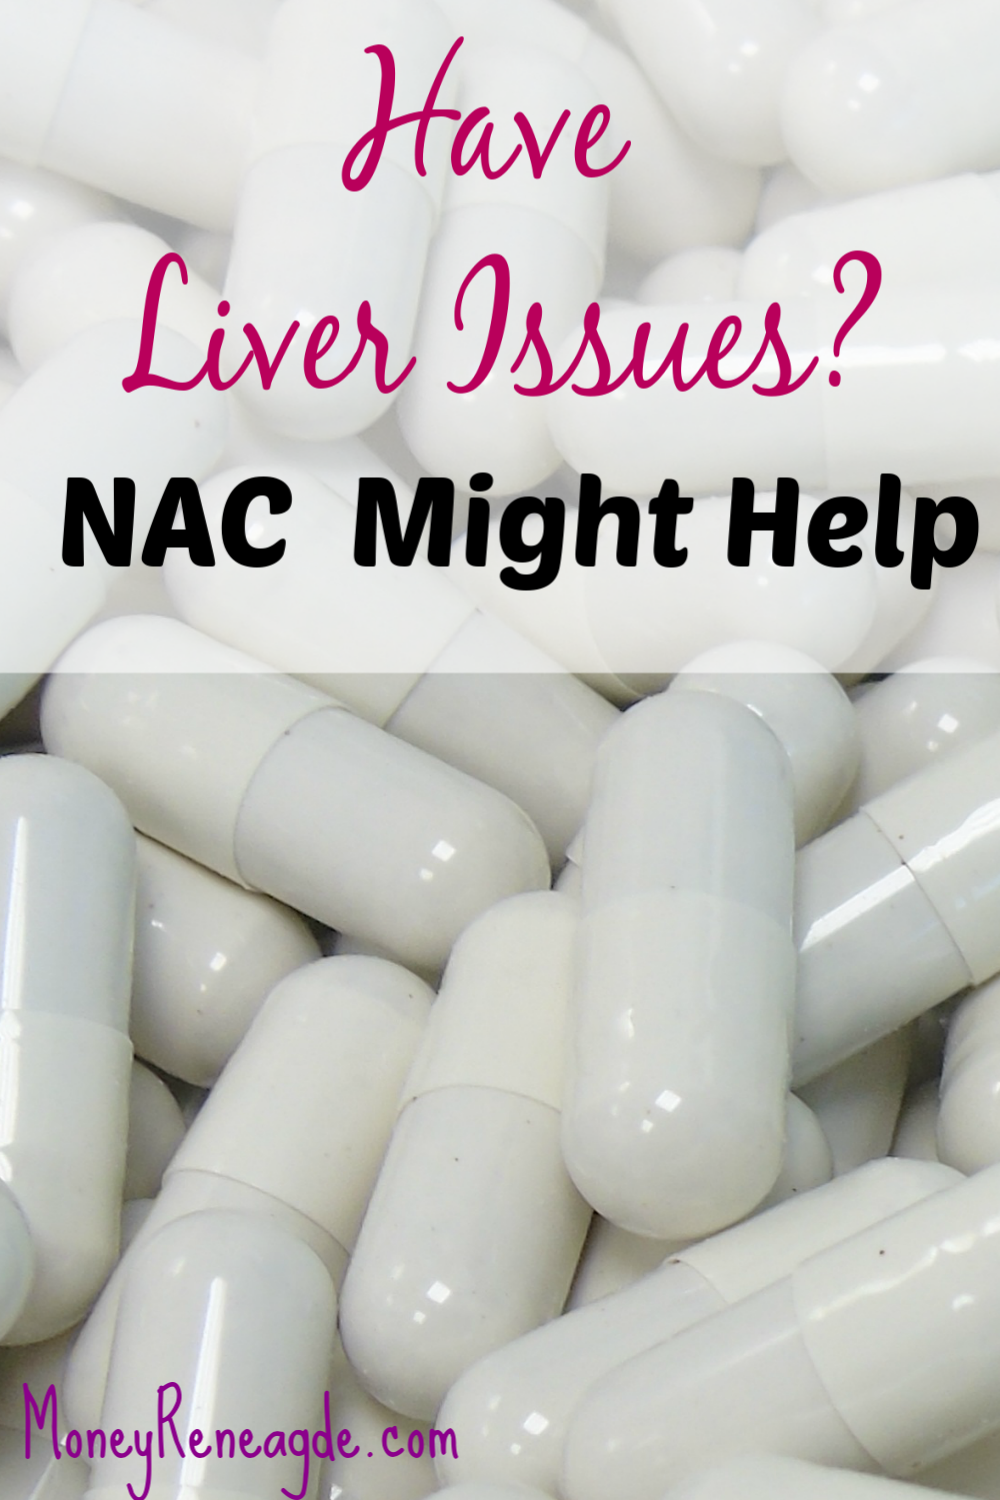 have liver issues? NAC might help